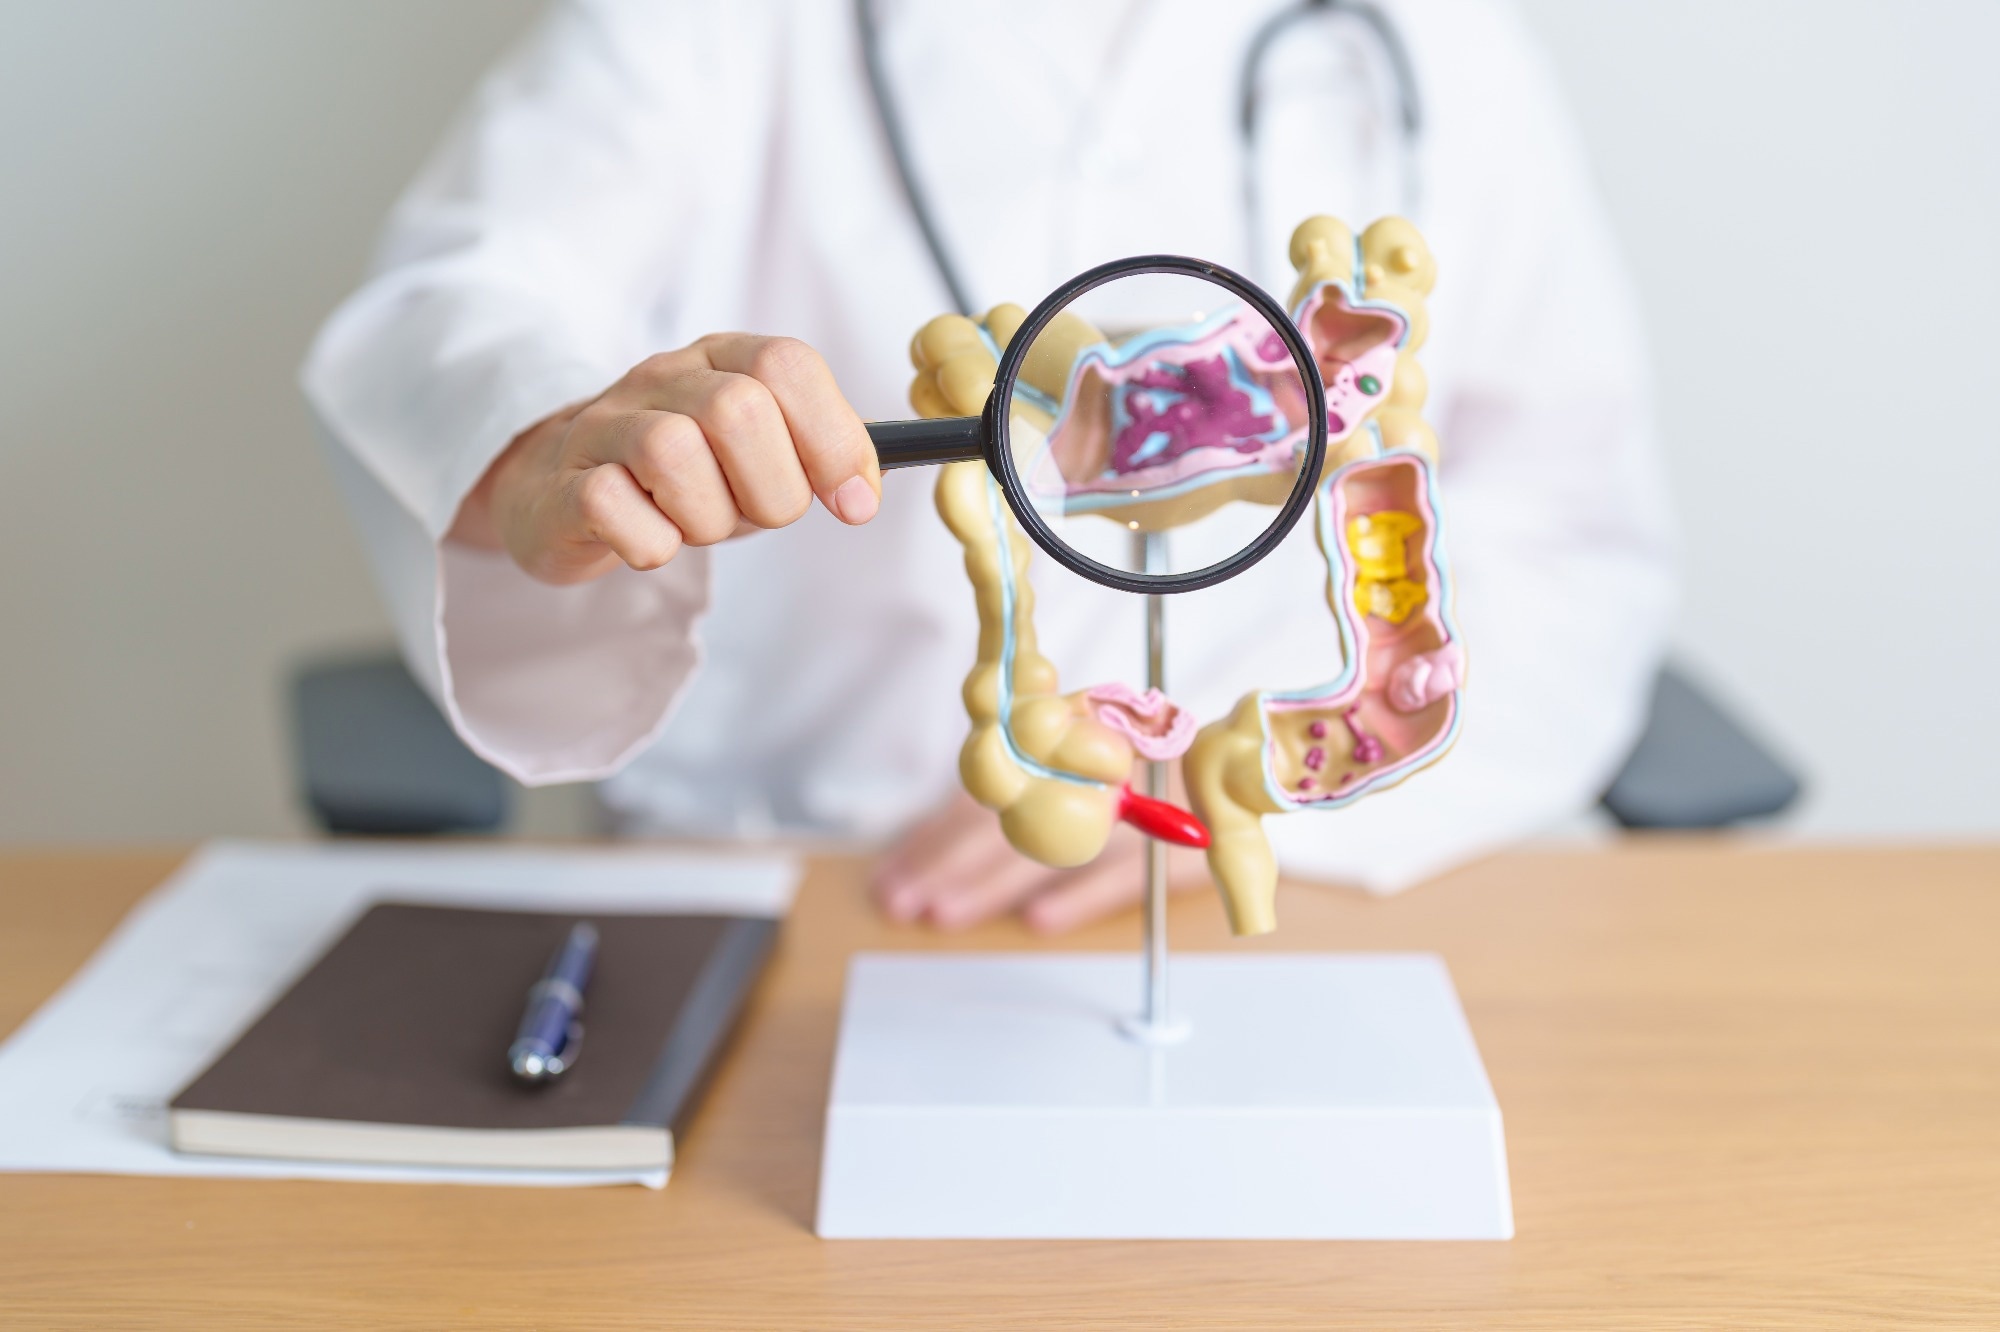 Study: Horizon scanning: new and future therapies in the management of inflammatory bowel disease. Imsge Credit: Jo Panuwat D / Shutterstock.com